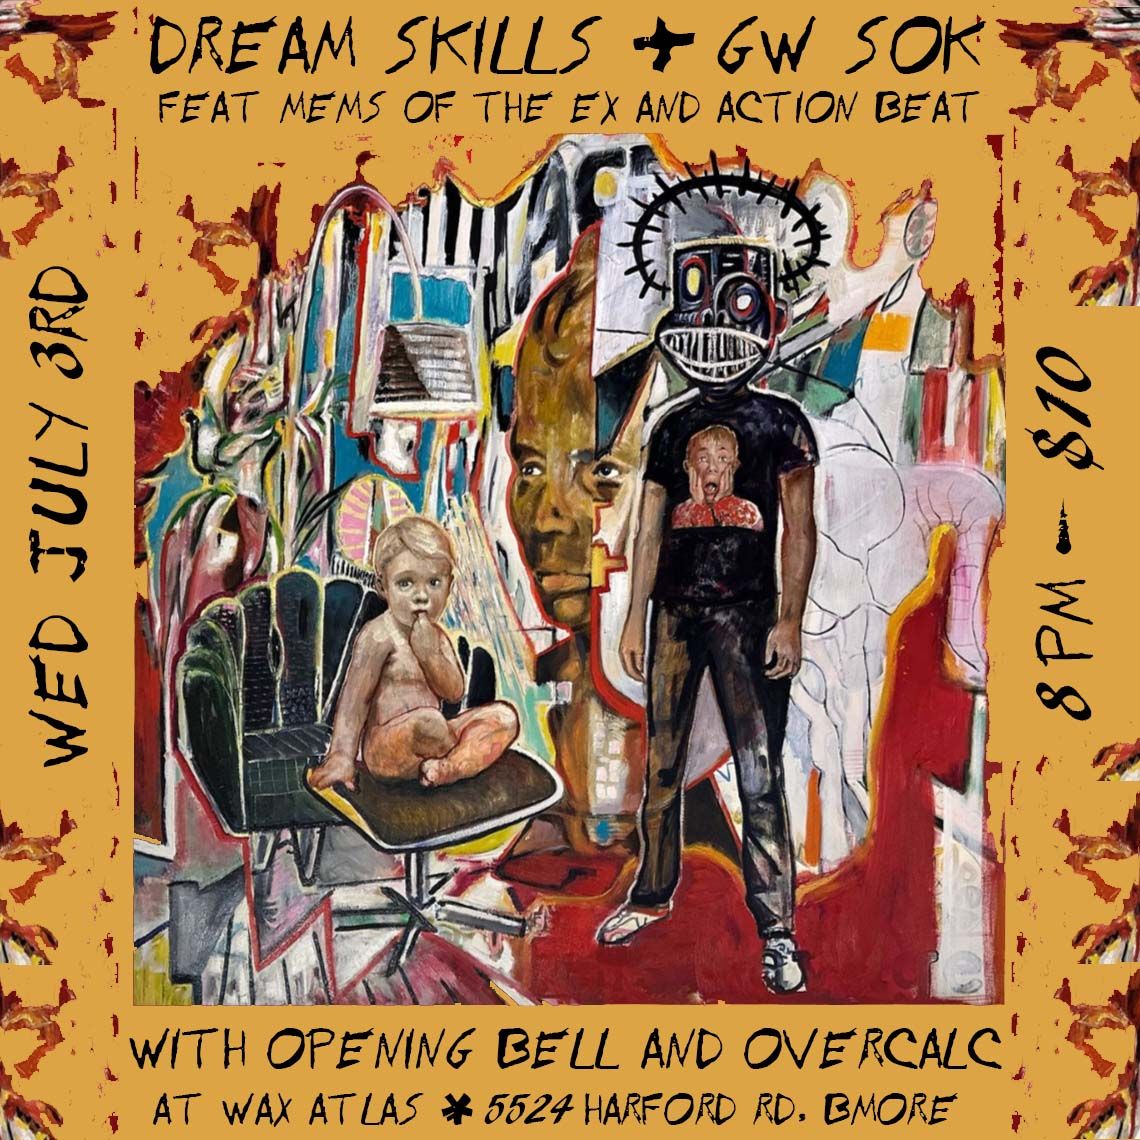 SURPRISE SHOW: DREAM SKILLS + GW SOK (SINGER OF THE EX) w\/ OPENING BELL + OVERCALC